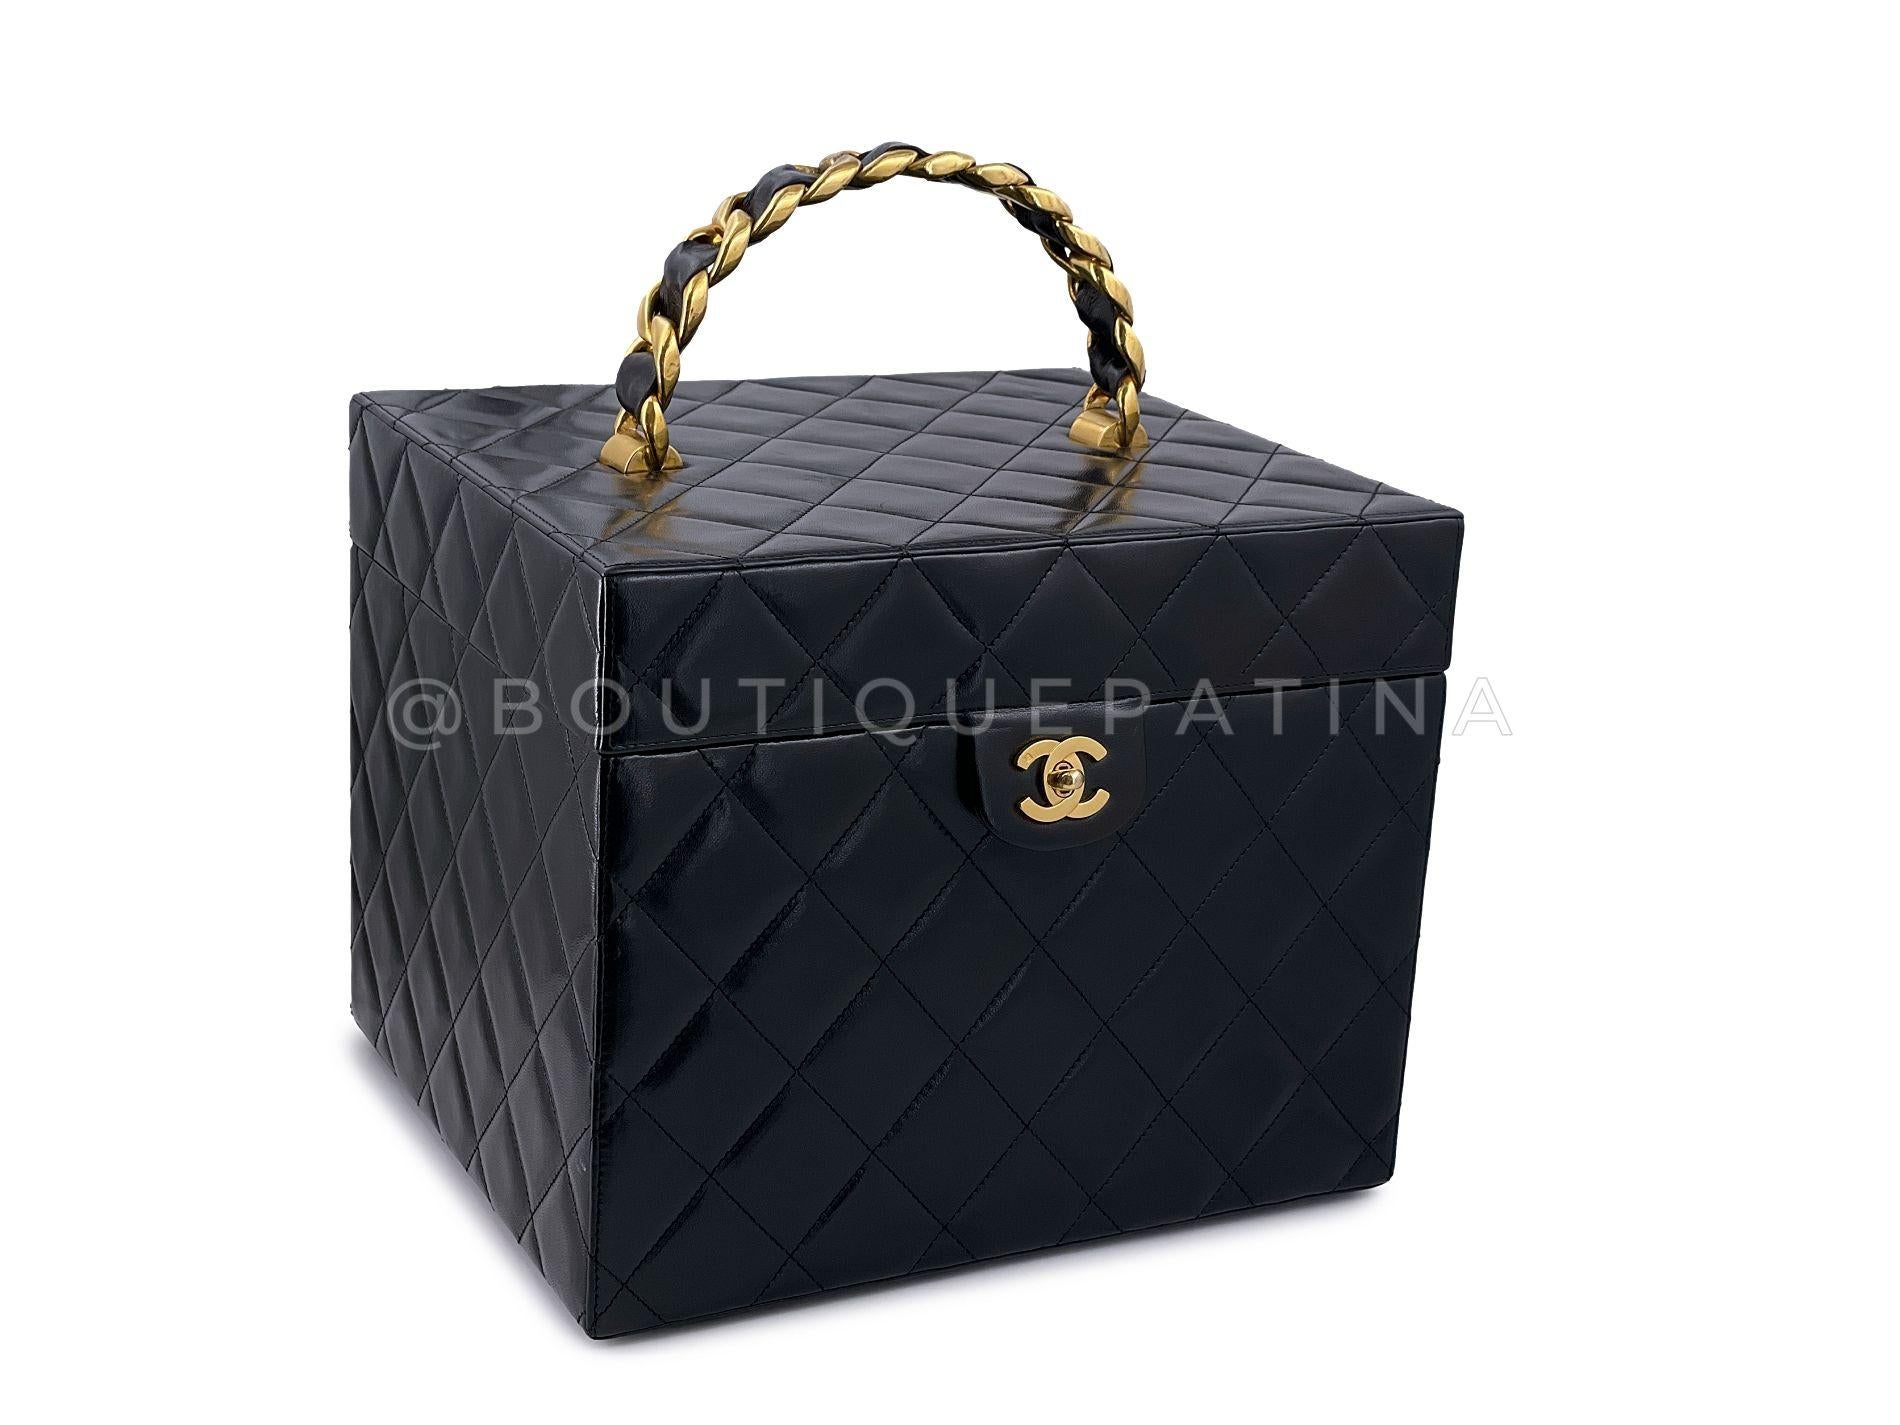 Store item: 68031
A very rare collectible item is this Chanel 1994 Vintage XL Quilted Box Vanity Case Bag 24k GHW.

There are many sizes and variations of this item released on the 1994 runway, but this beauty is the perfect cube version. A hefty